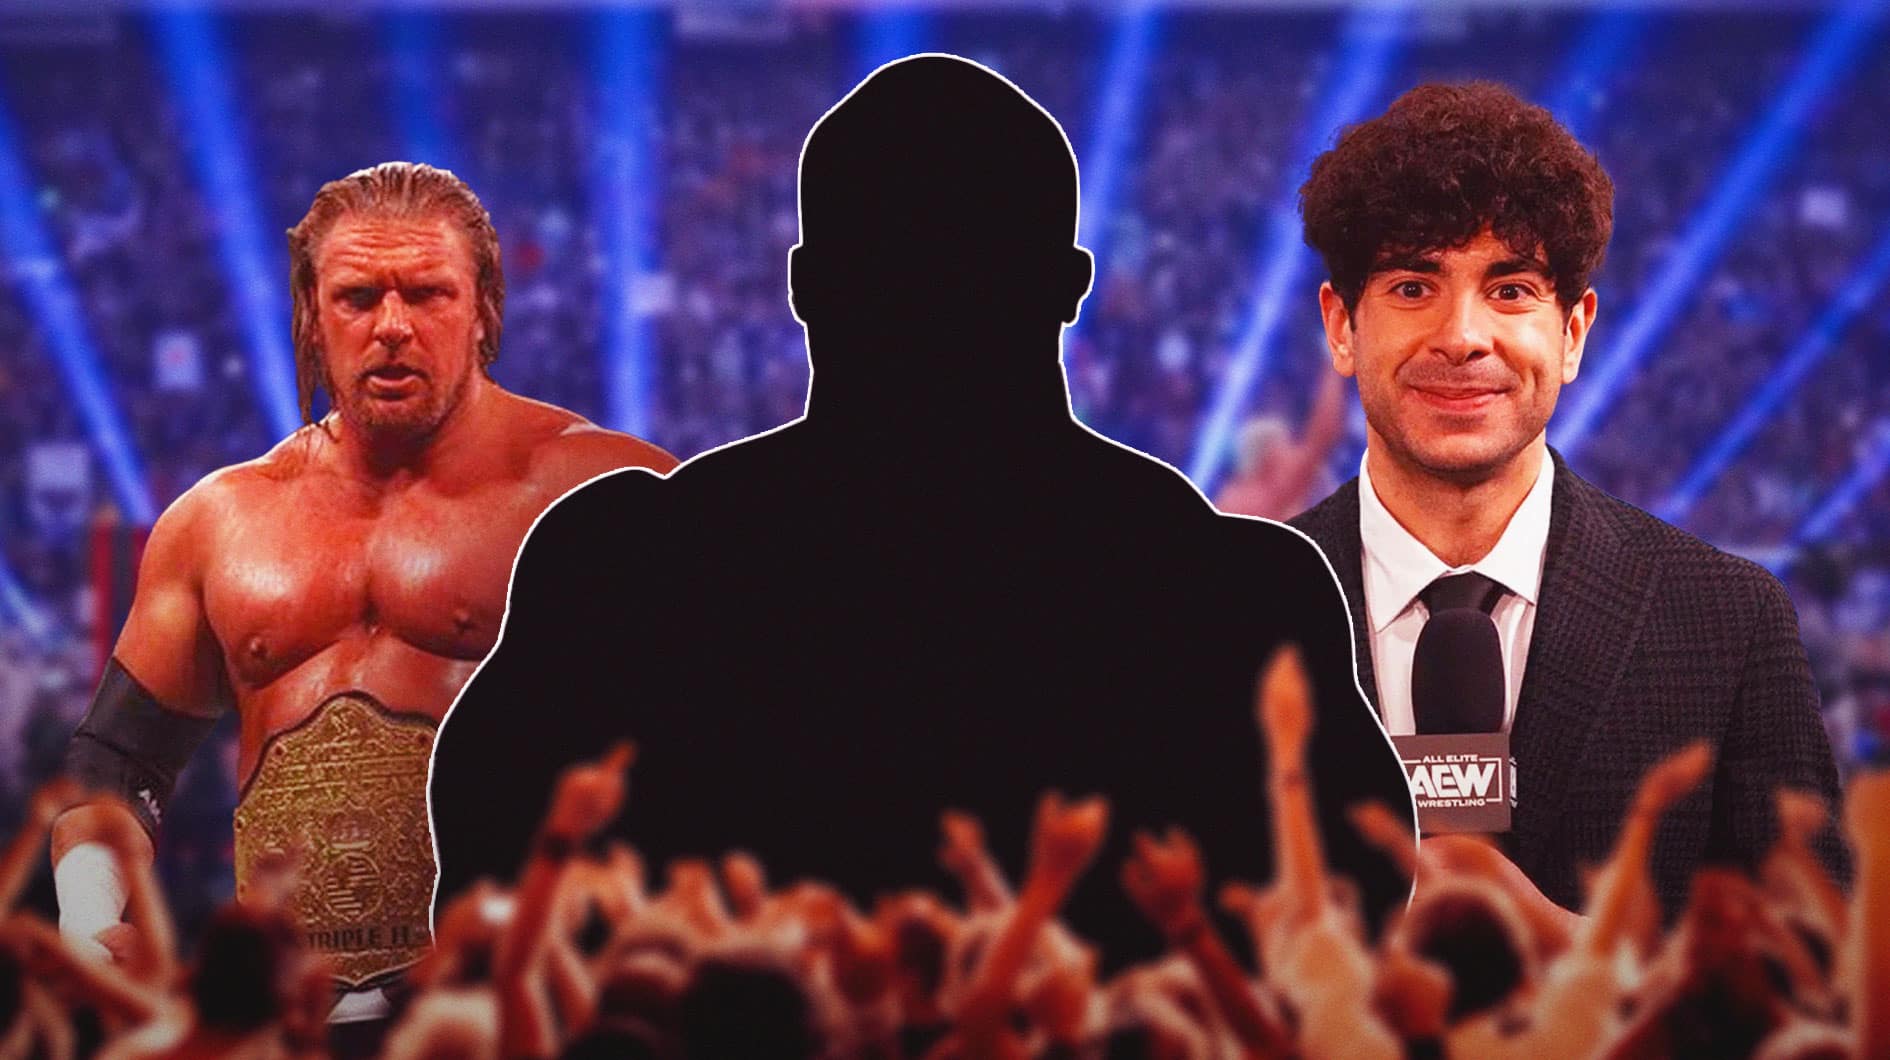 WWE Rumor: Triple H Has Seemingly Lost Some 'Almighty Business' To Tony Khan And AEW